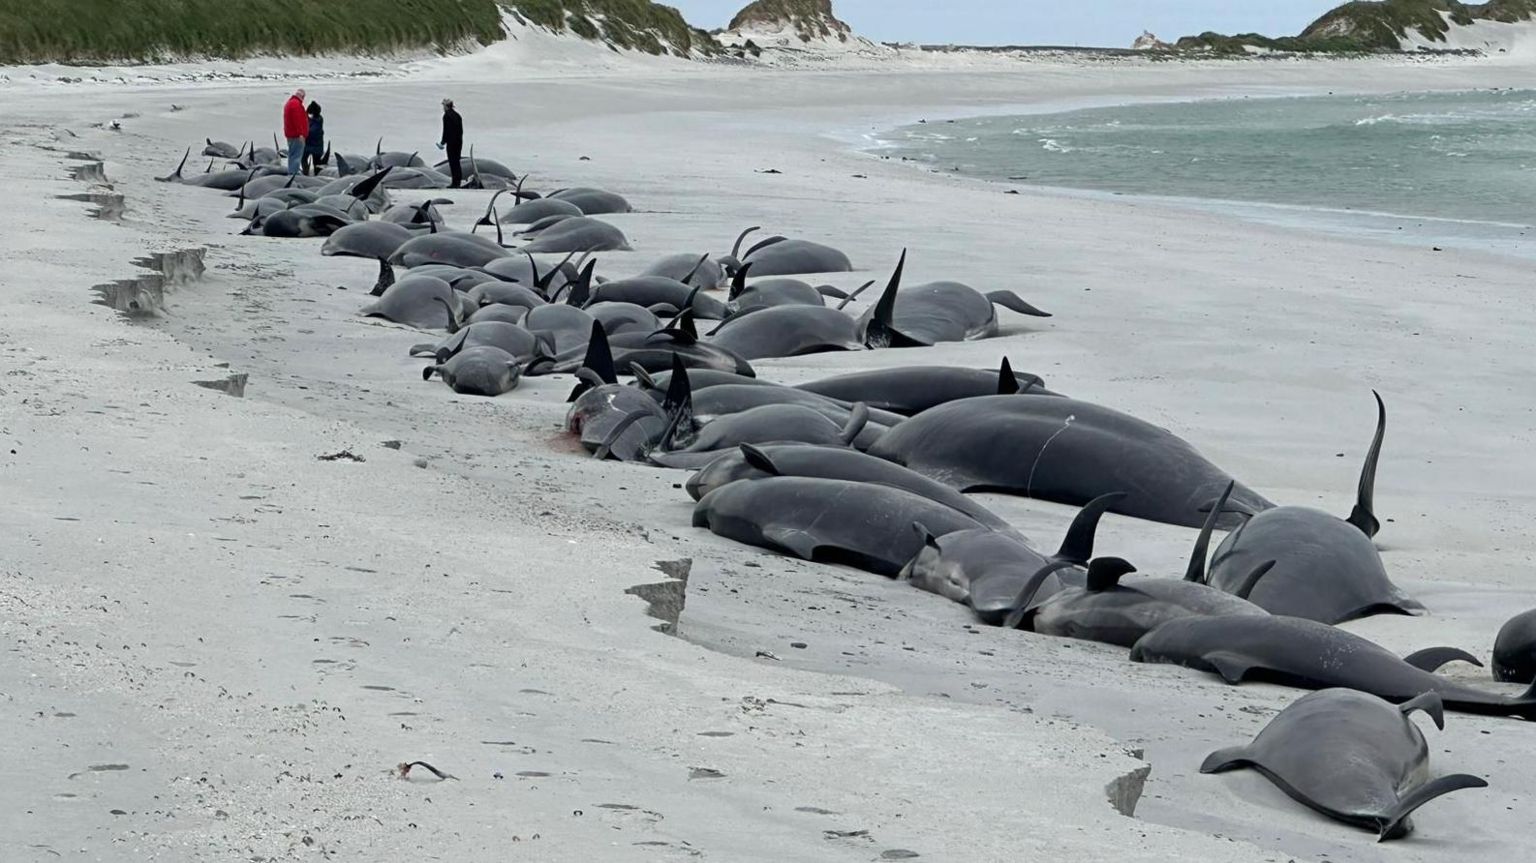 Dozens of whales washed up on Tresness Beach